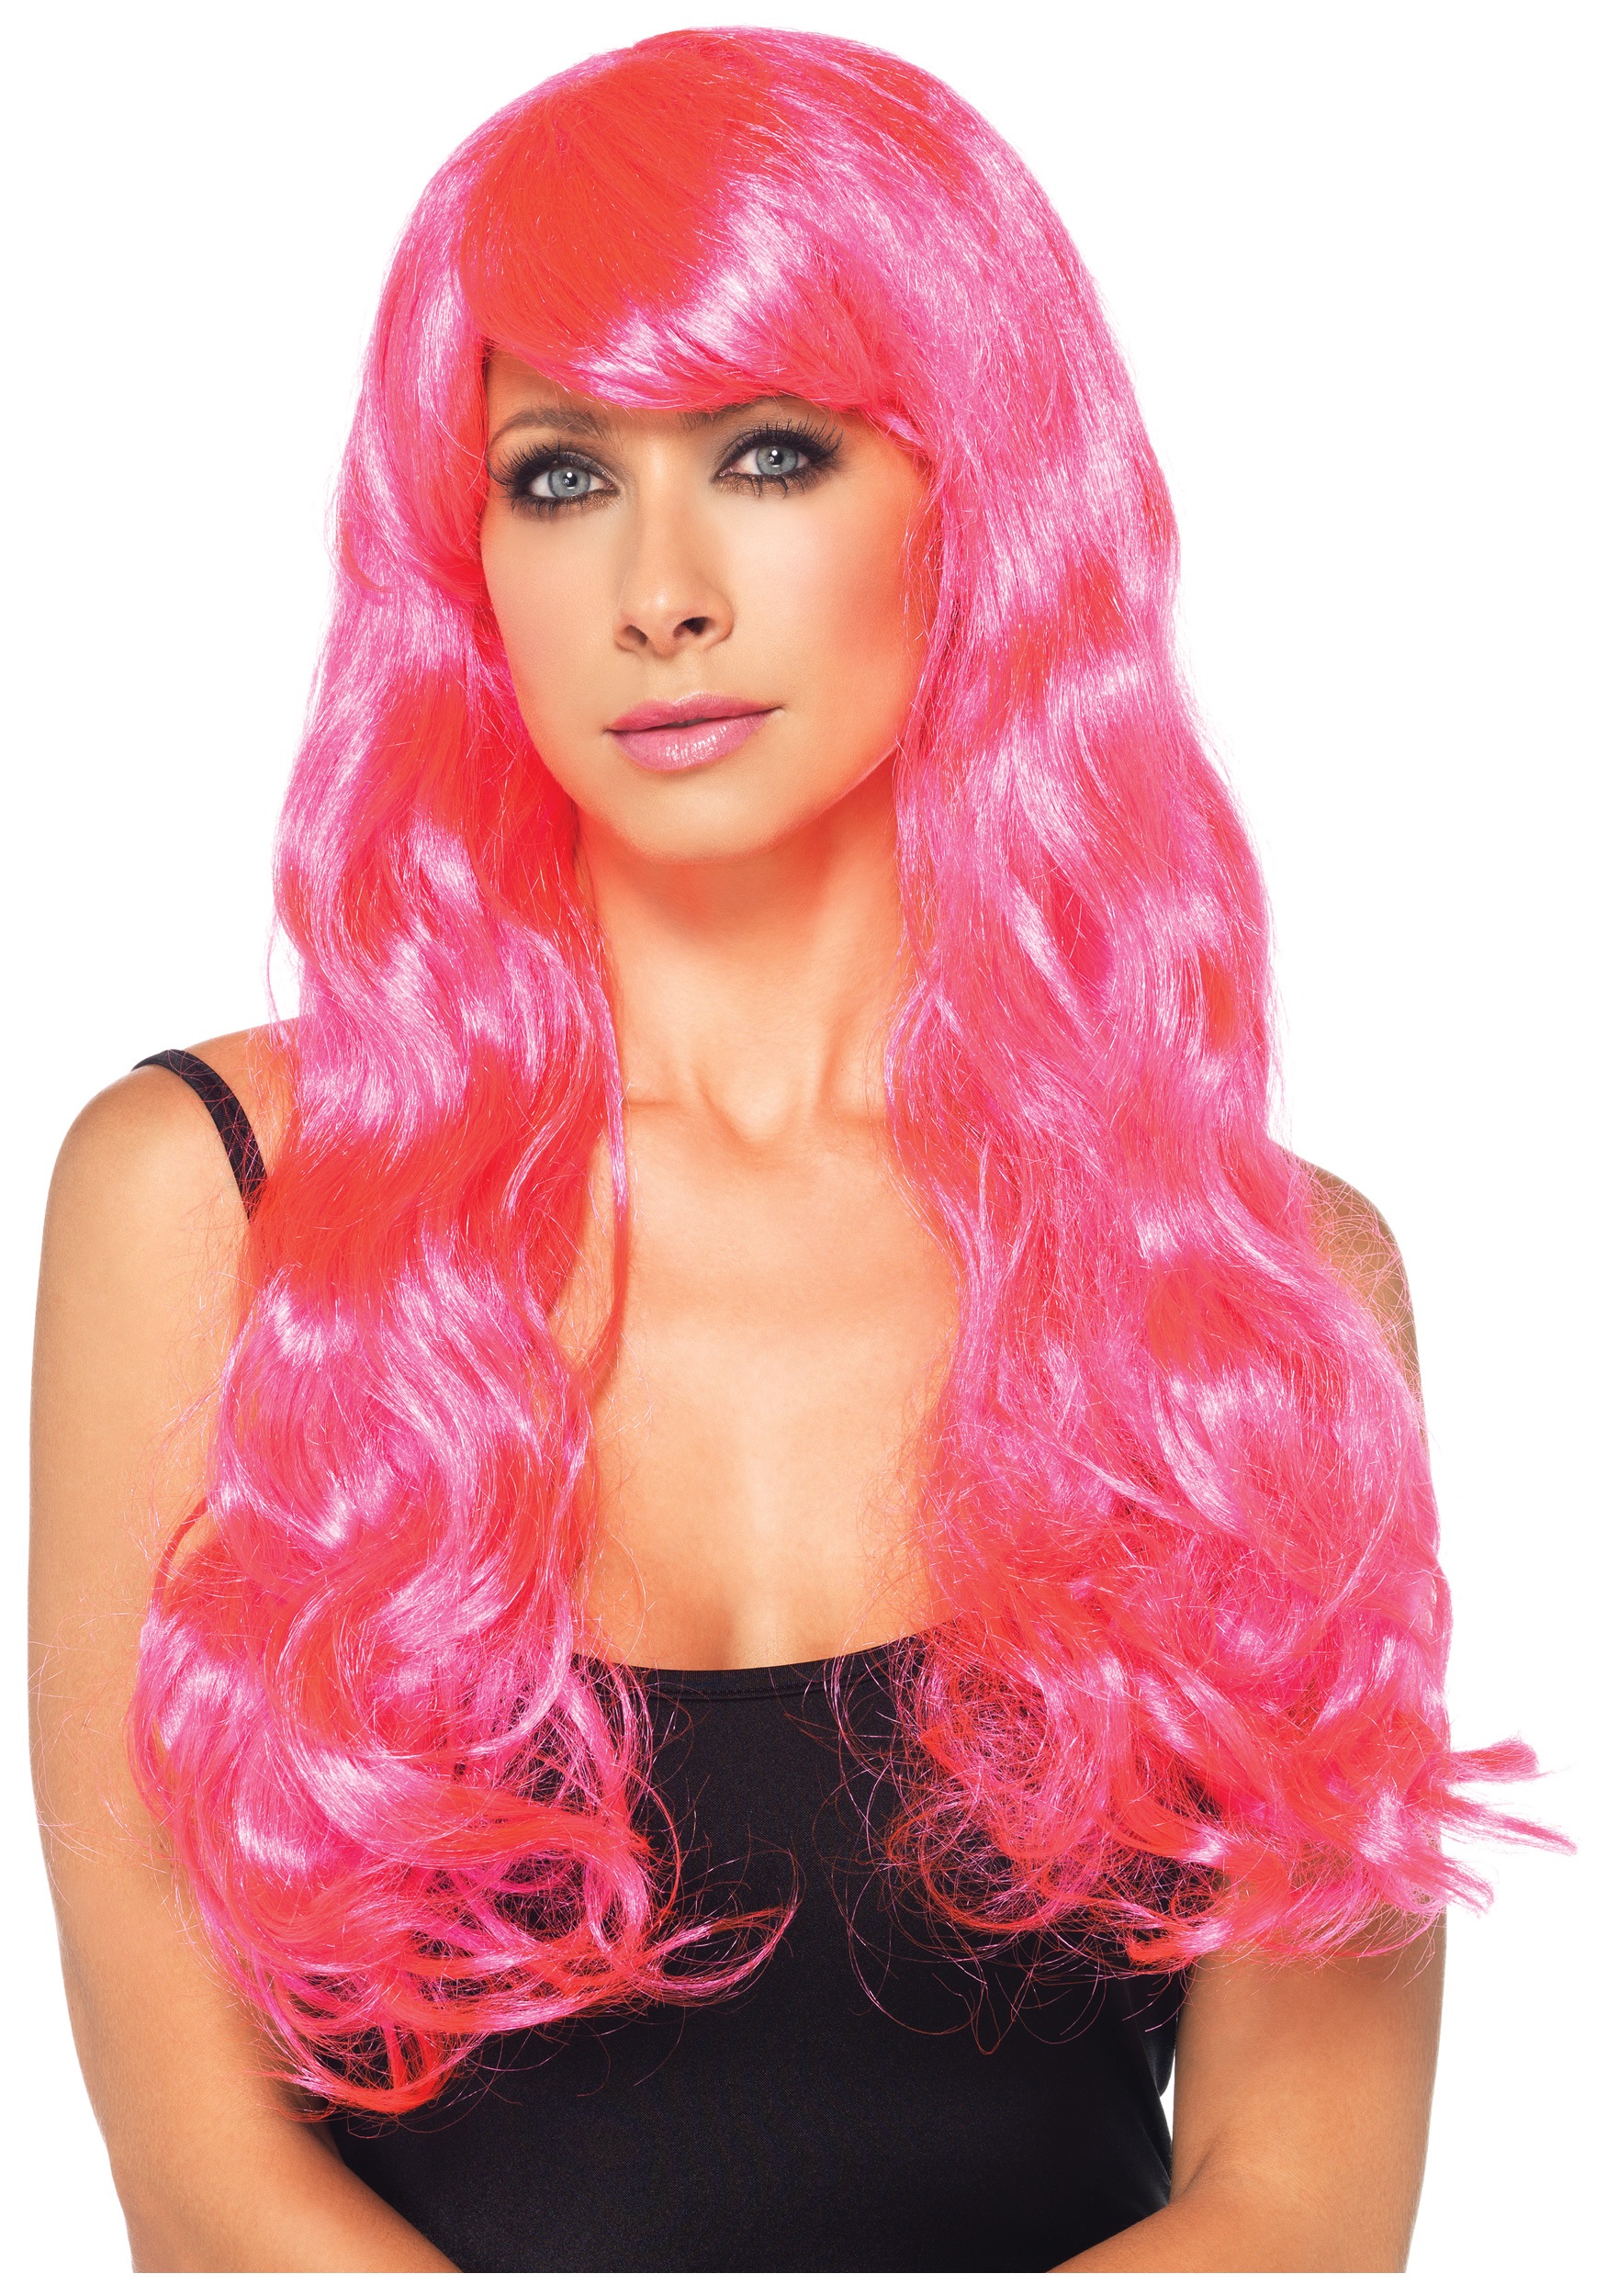 Passion Long straight Neon Pink Wig | eBay